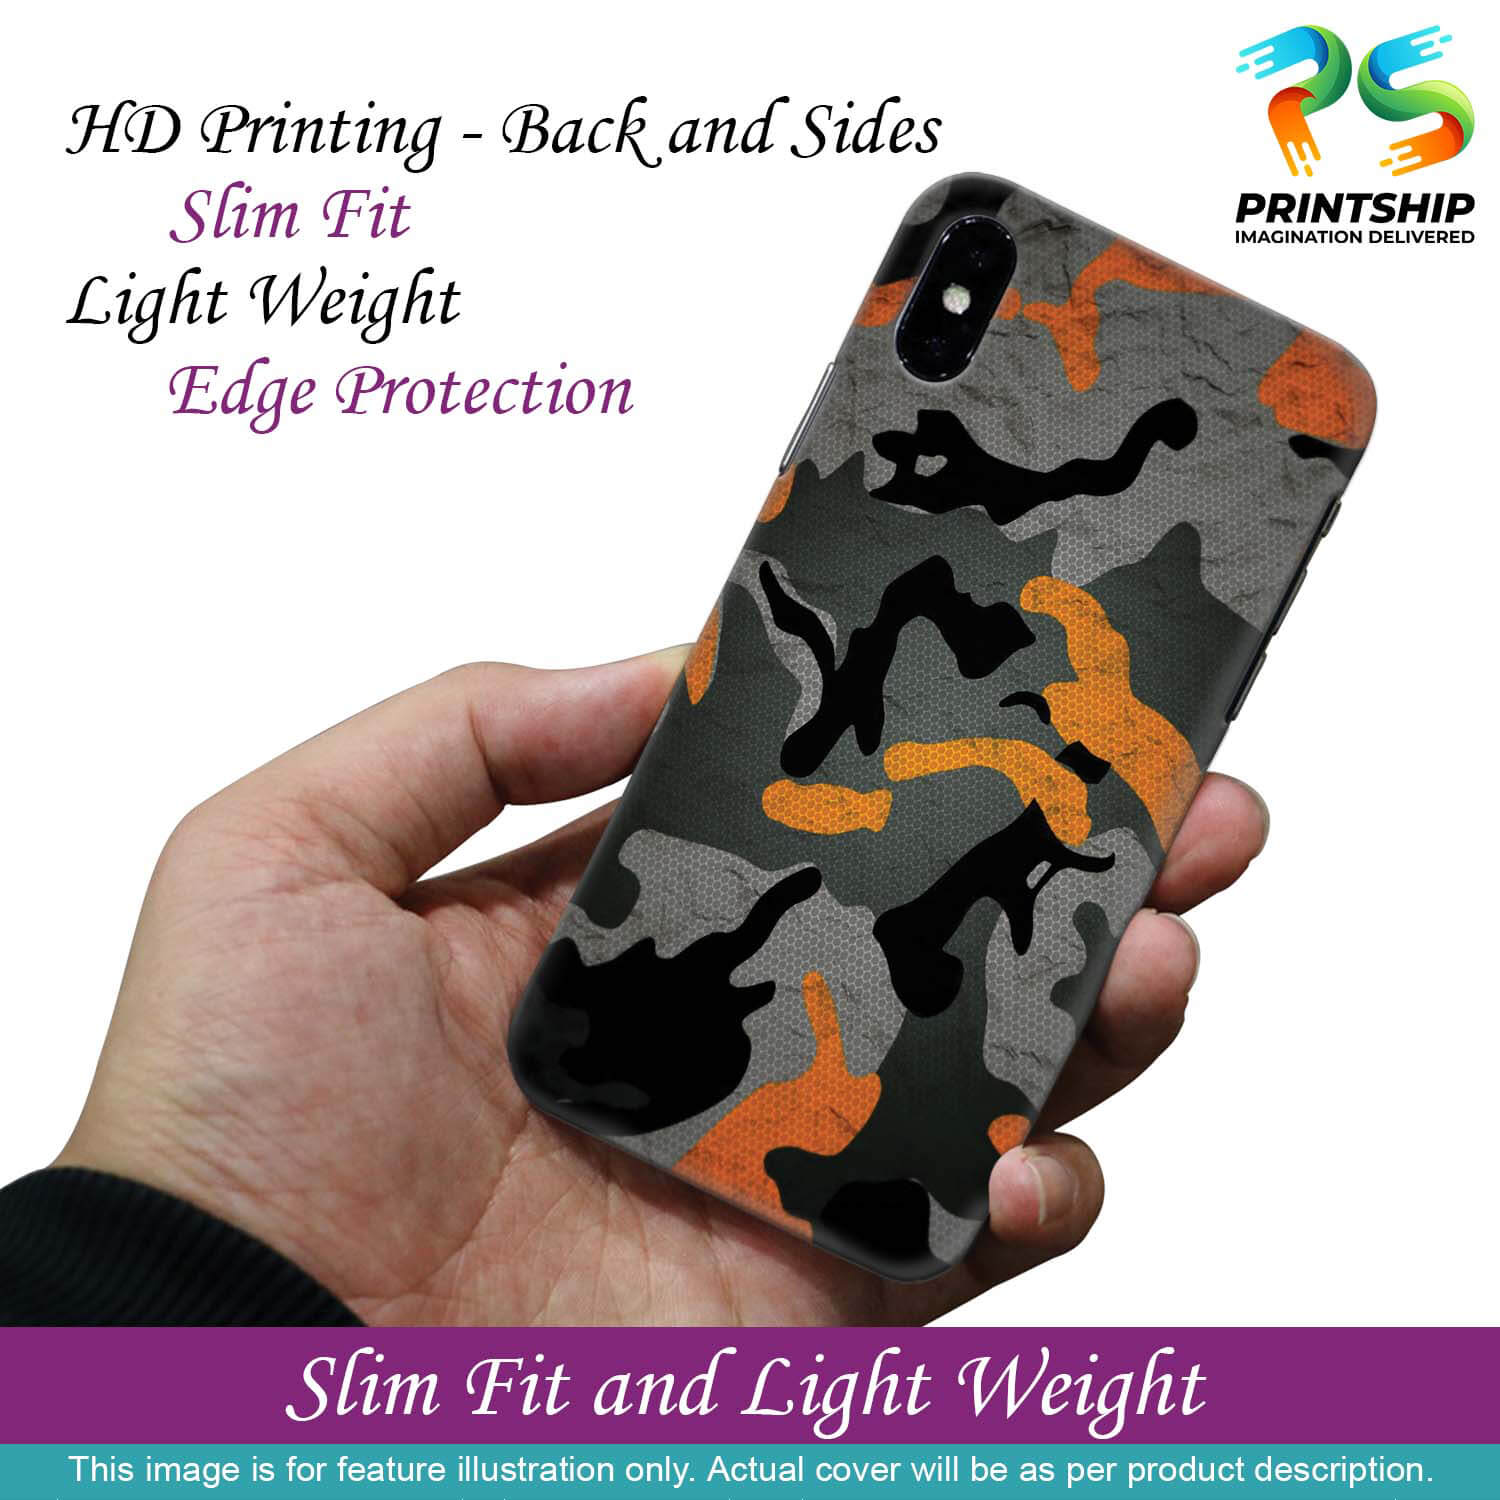 PS1337-Premium Looking Camouflage Back Cover for Vivo S1